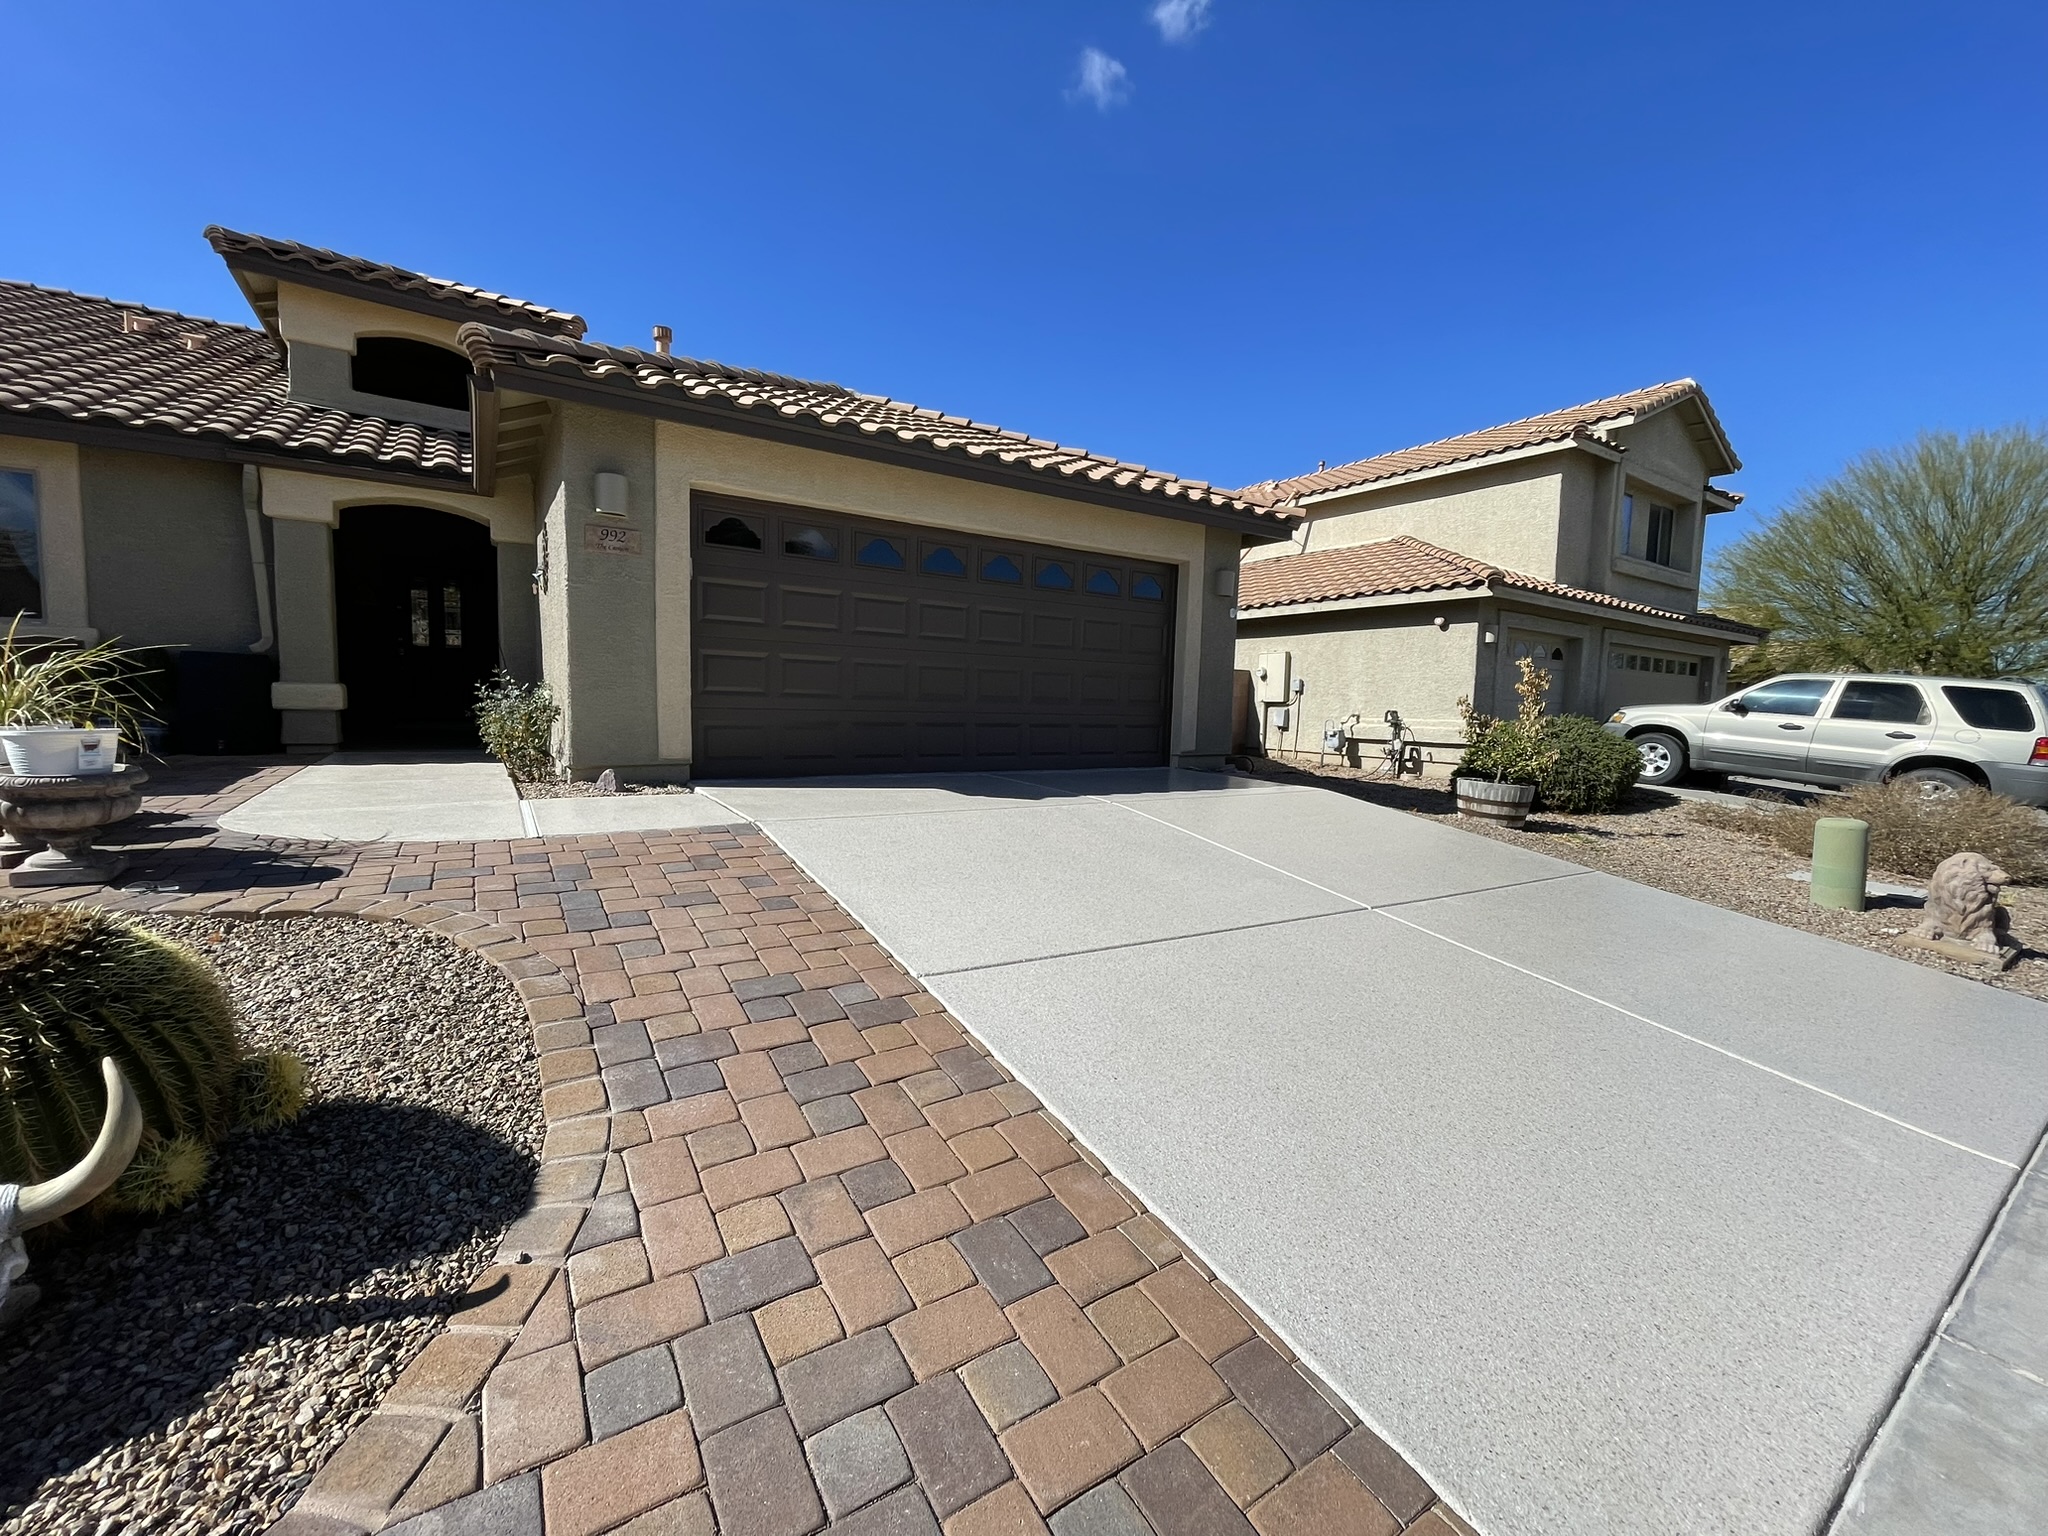 Top Quality Driveway Concrete Coating Performed In, Green Valley, AZ